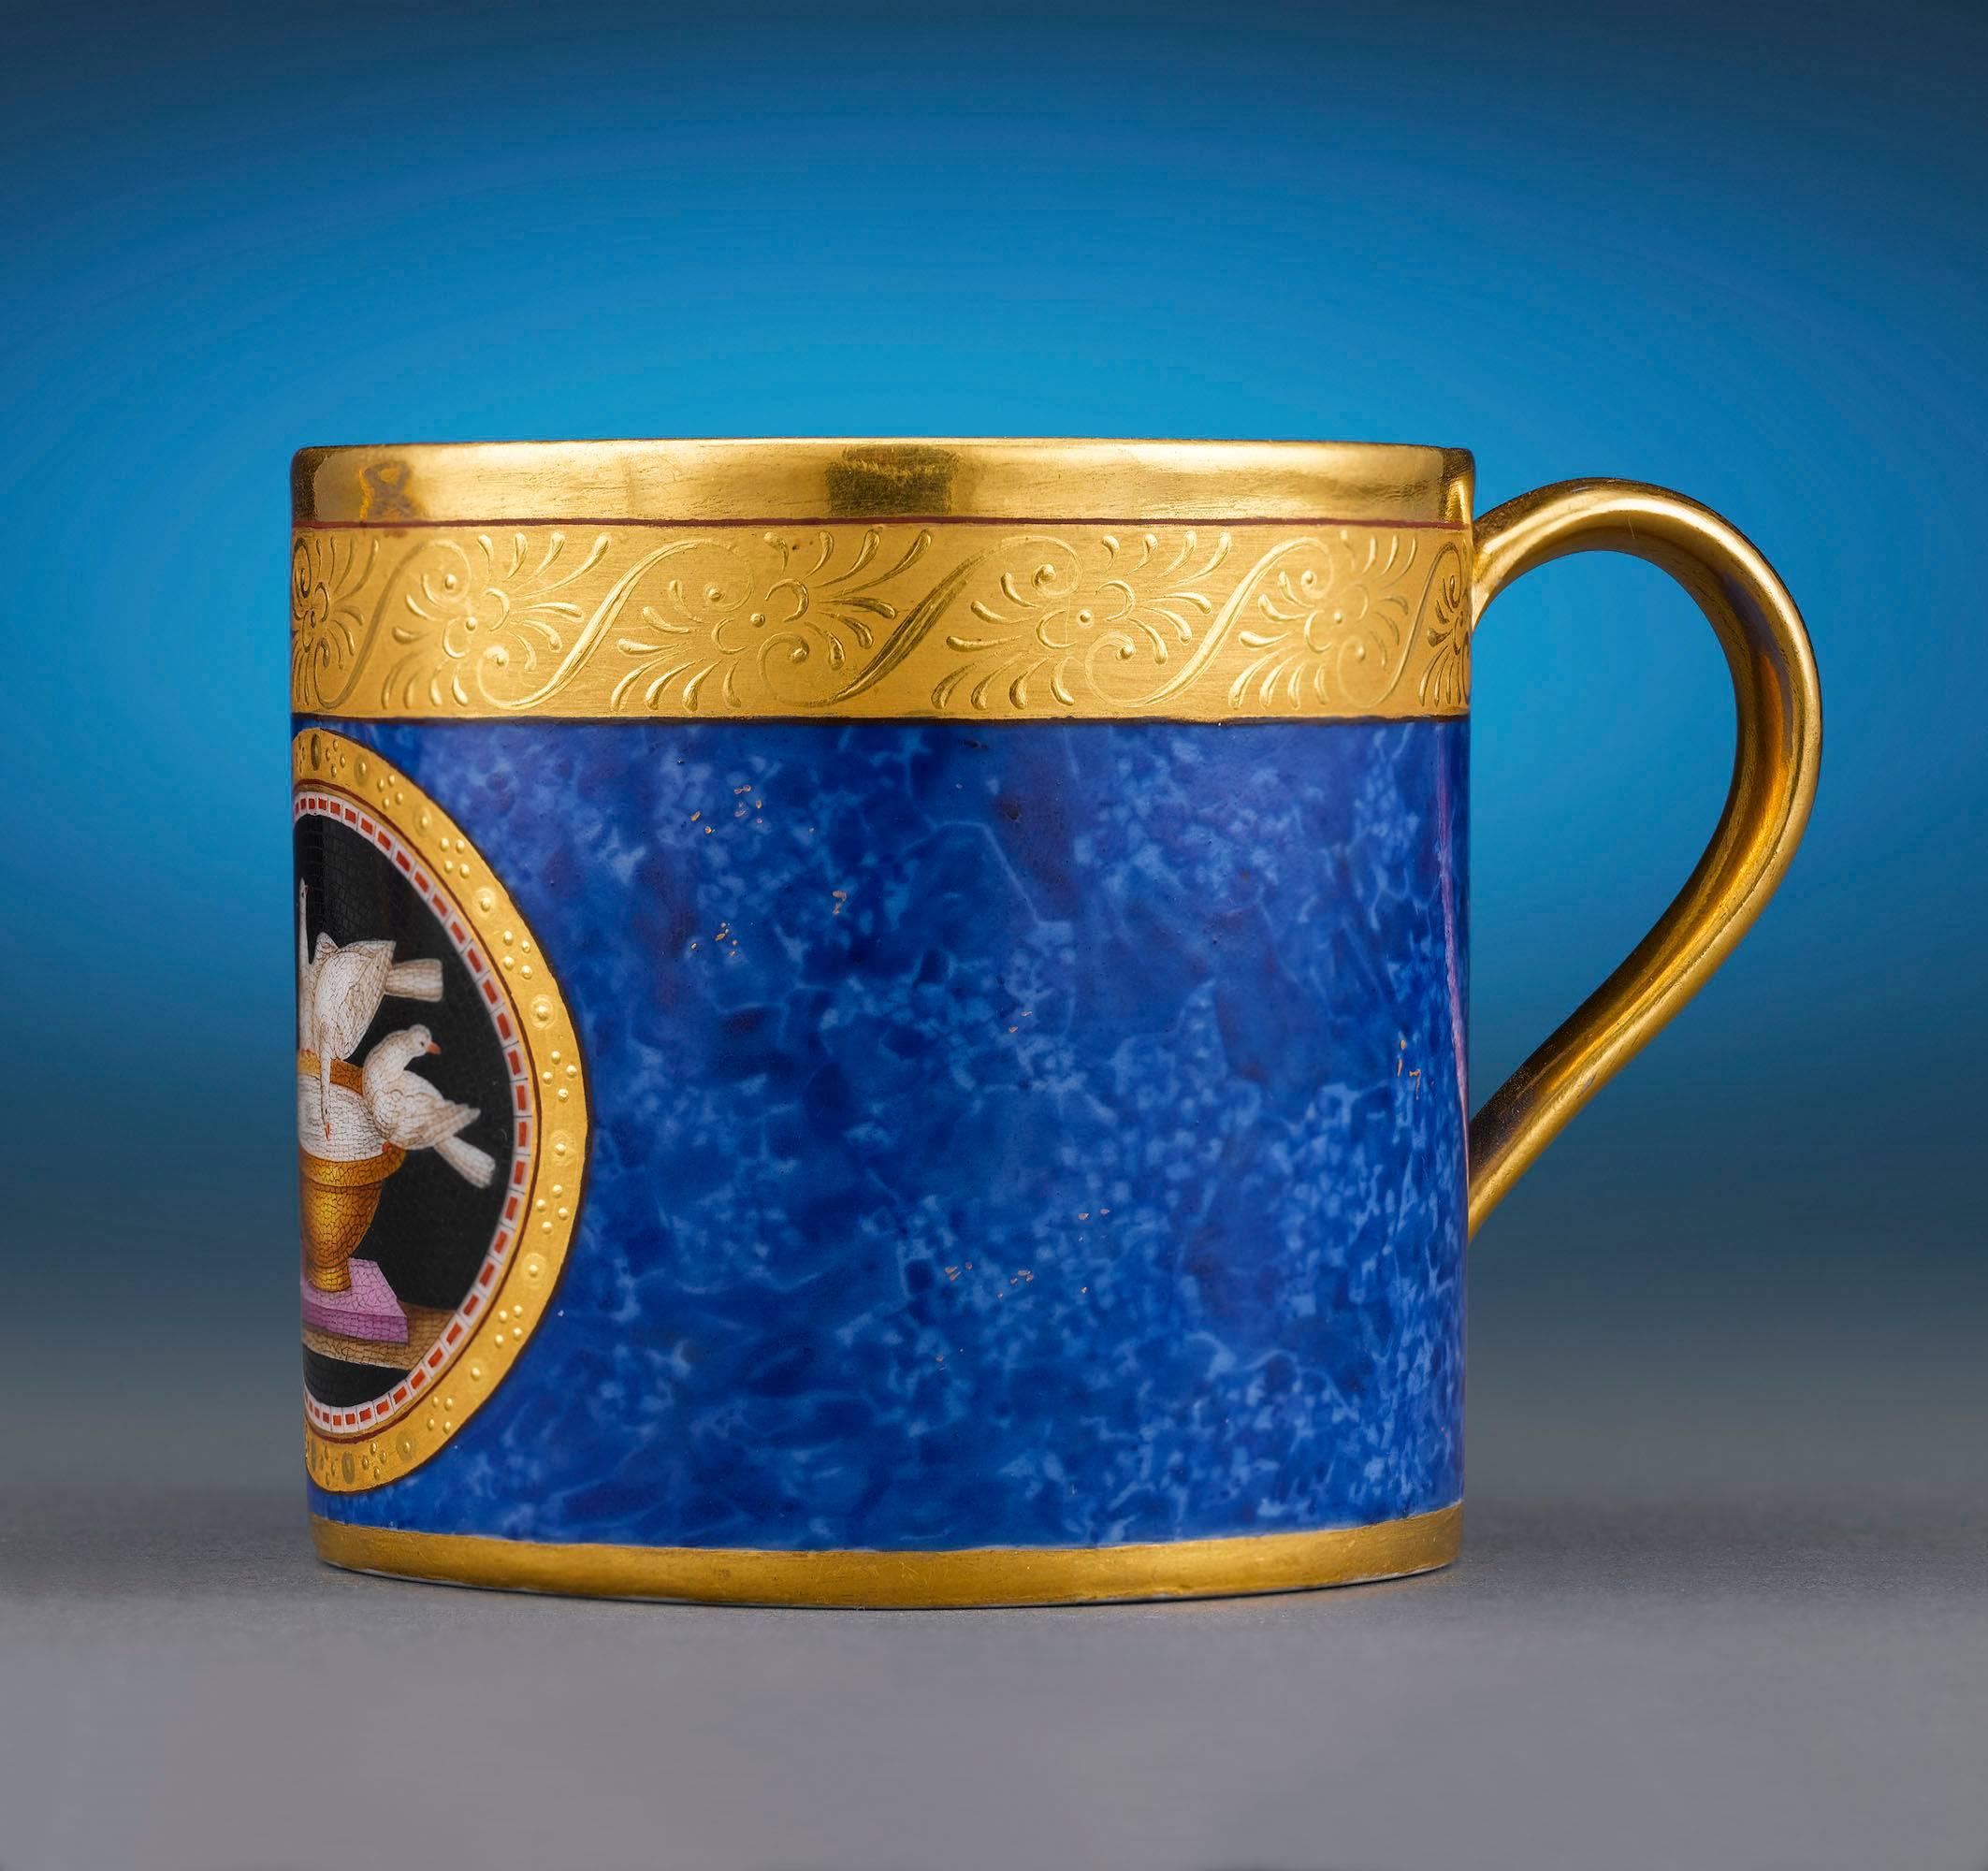 This exceptional KPM Berlin coffee cup and saucer features some of the most technically demanding painting and skilful imitation of precious stones ever created by the renowned porcelain manufactory. Featuring an intricate hand-painted design in the